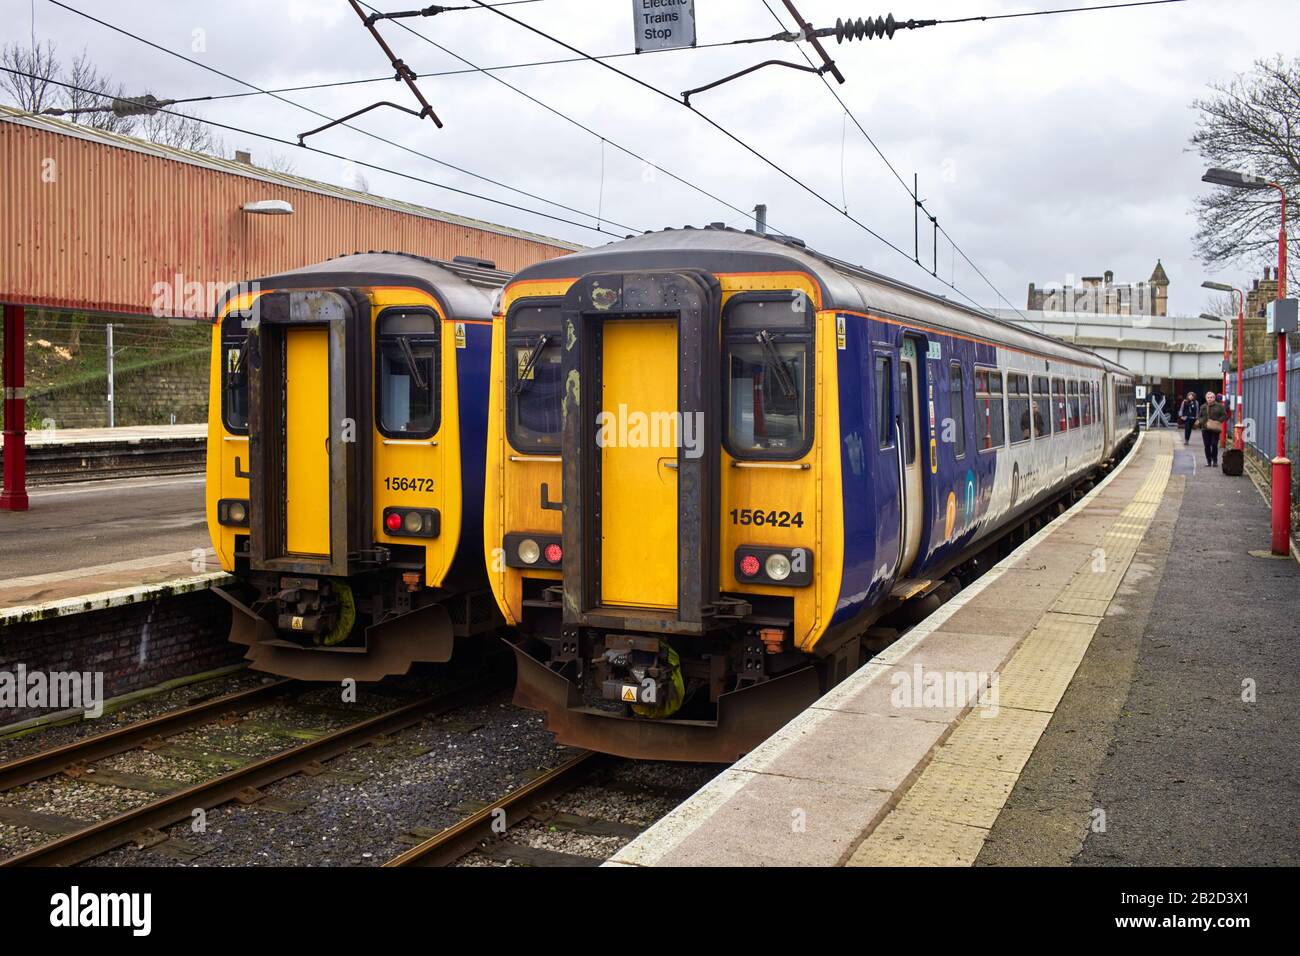 Class 156 Super Sprinter diesel multiple unit trains at Lancaster station in Northern trains livery Stock Photo